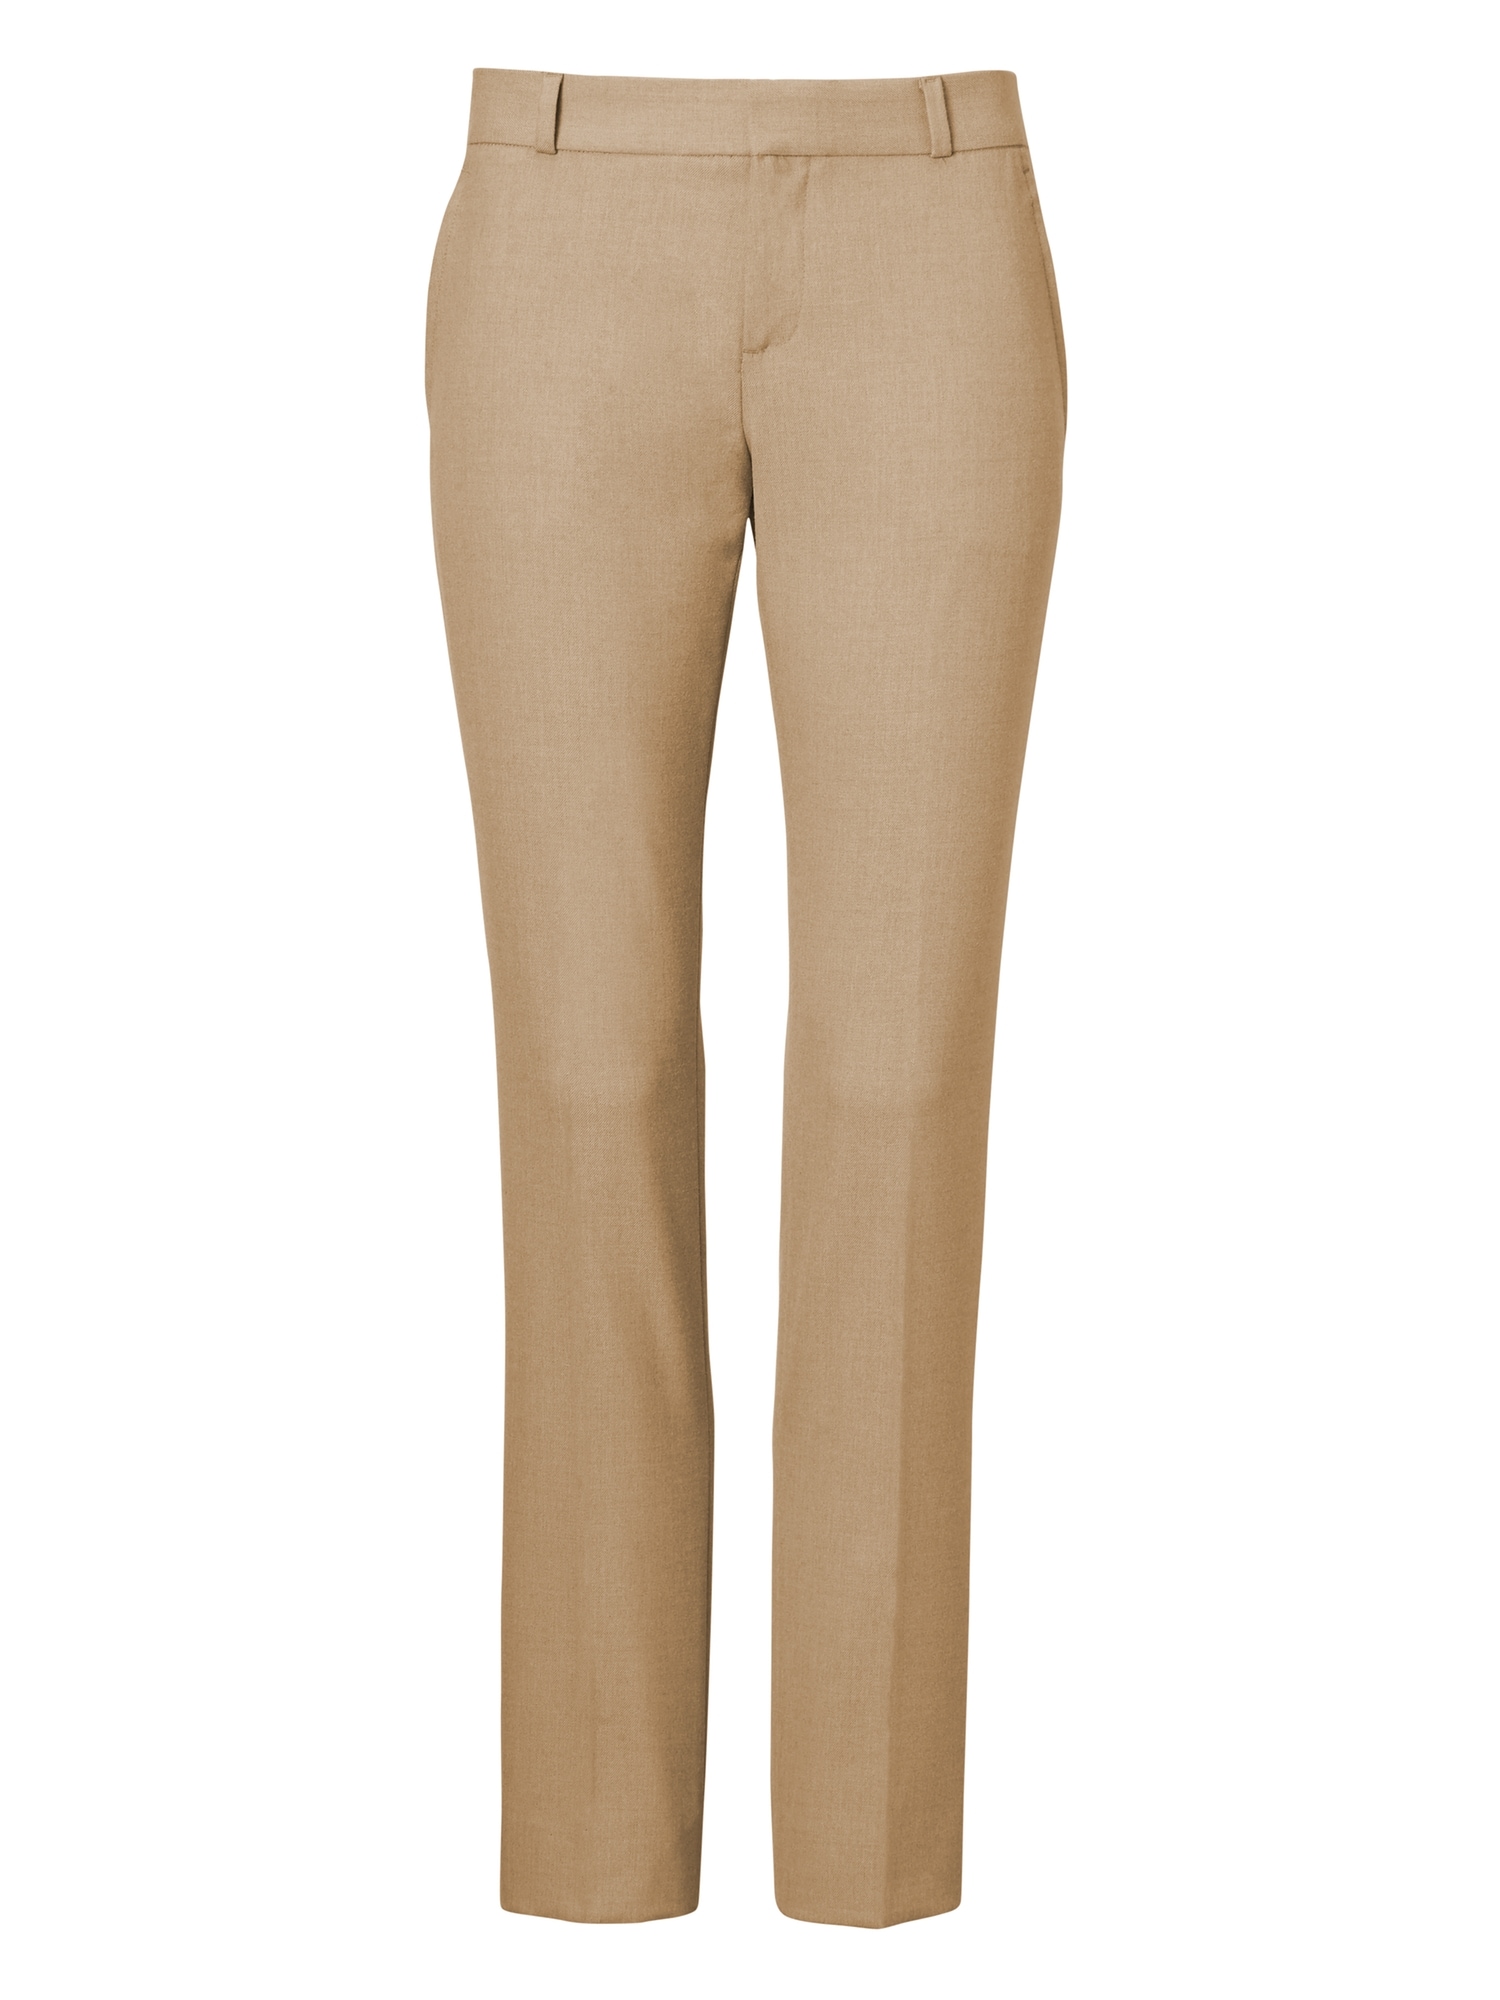 Ryan Slim Straight-Fit Luxe Brushed Twill Pant